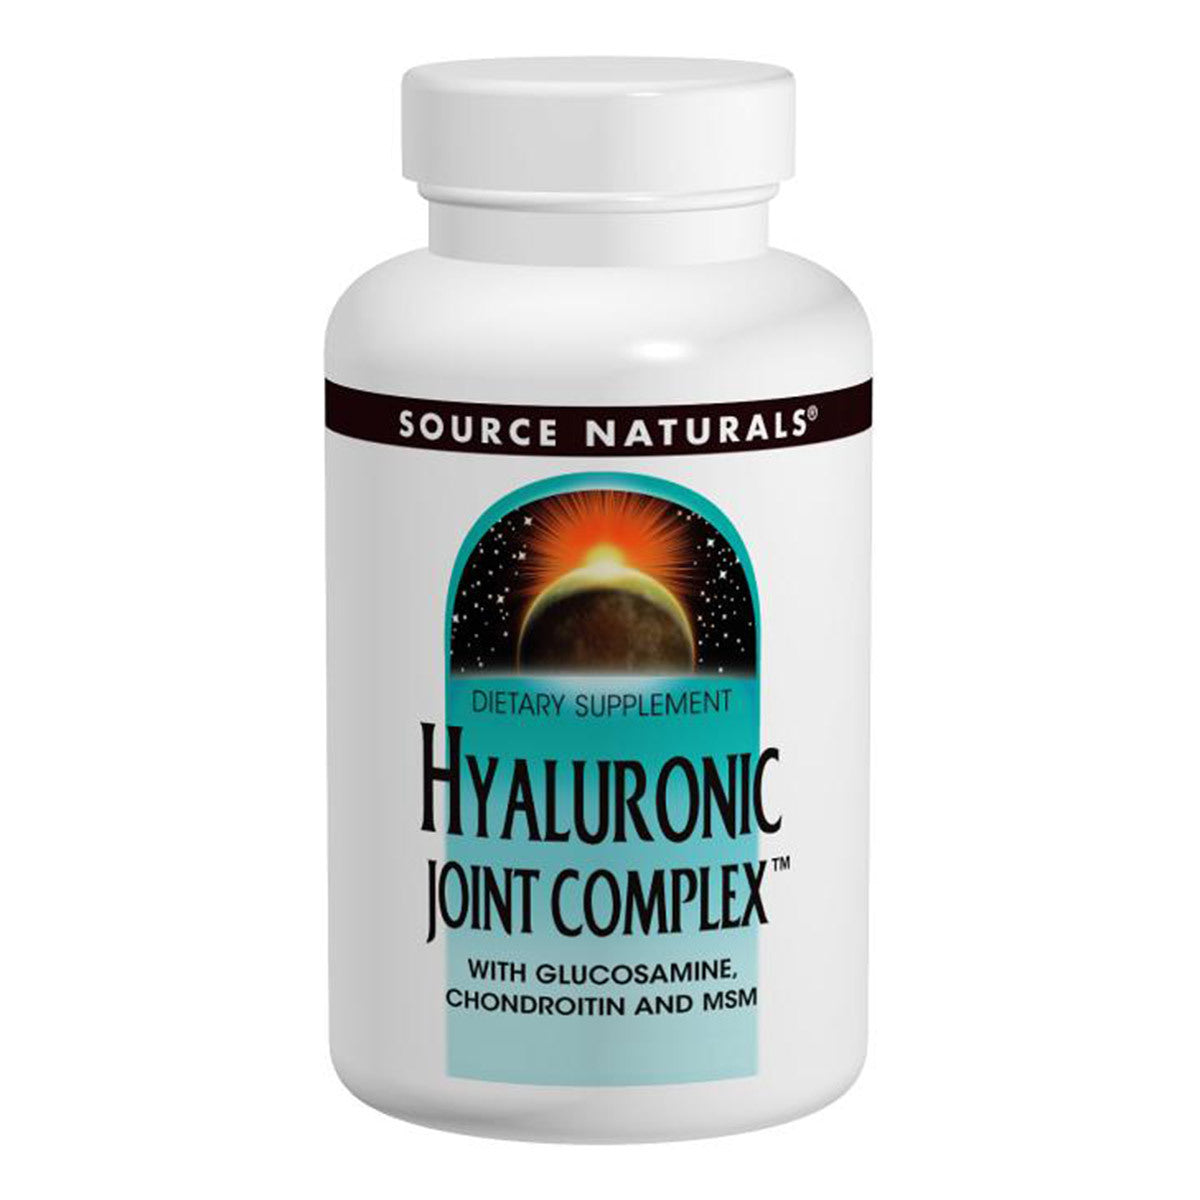 Primary image of Hyaluronic Joint Complex